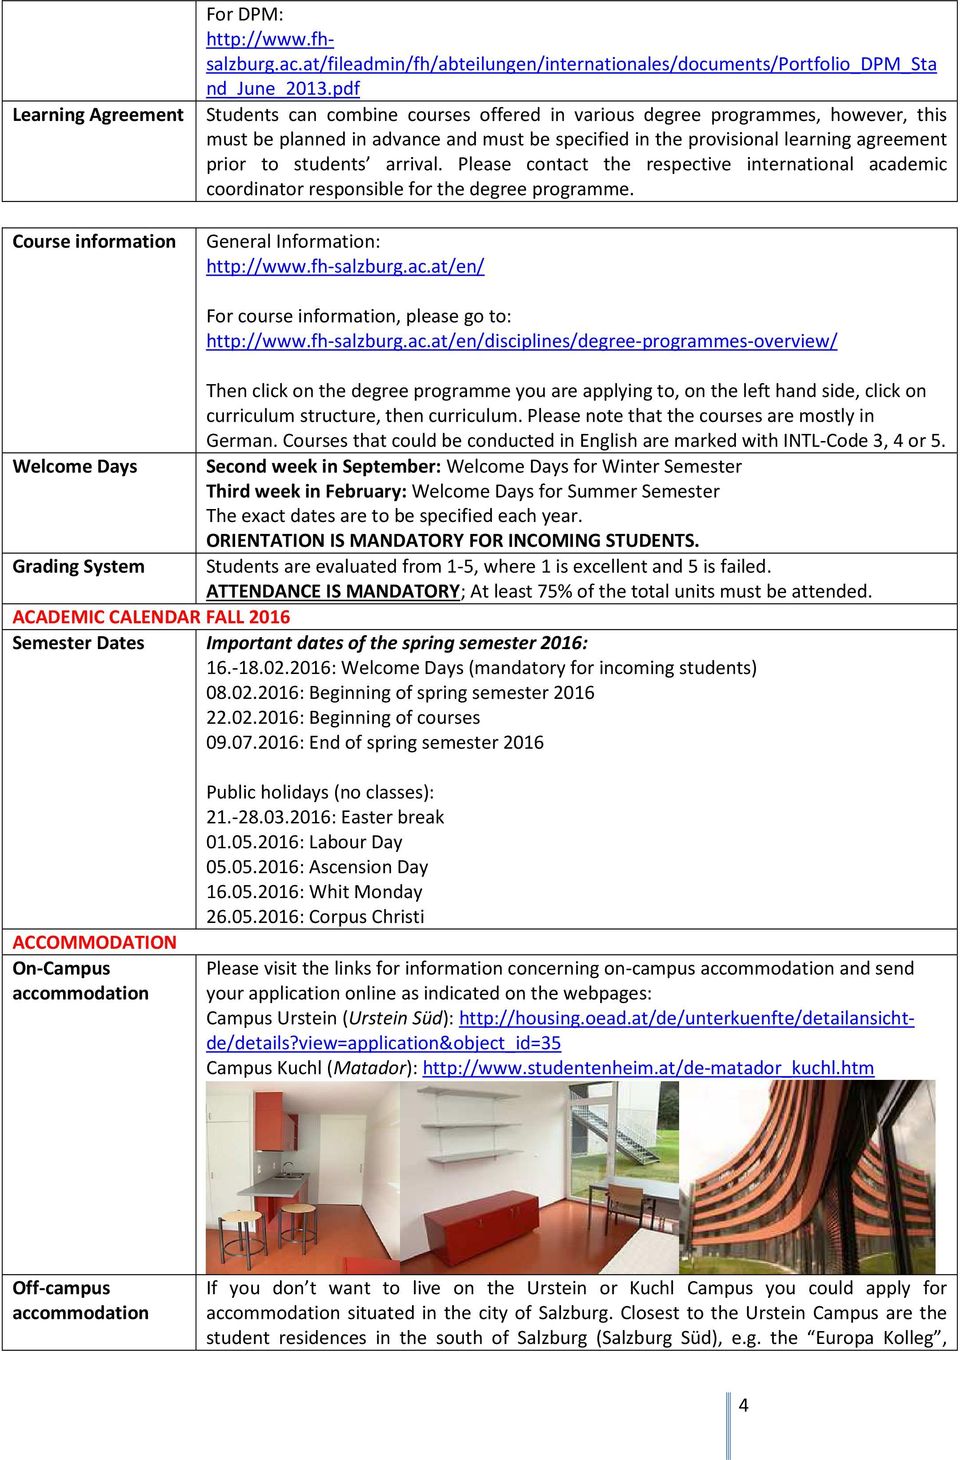 students arrival. Please contact the respective international academic coordinator responsible for the degree programme. Course information General Information: http://www.fh-salzburg.ac.at/en/ Welcome Days Grading System For course information, please go to: http://www.